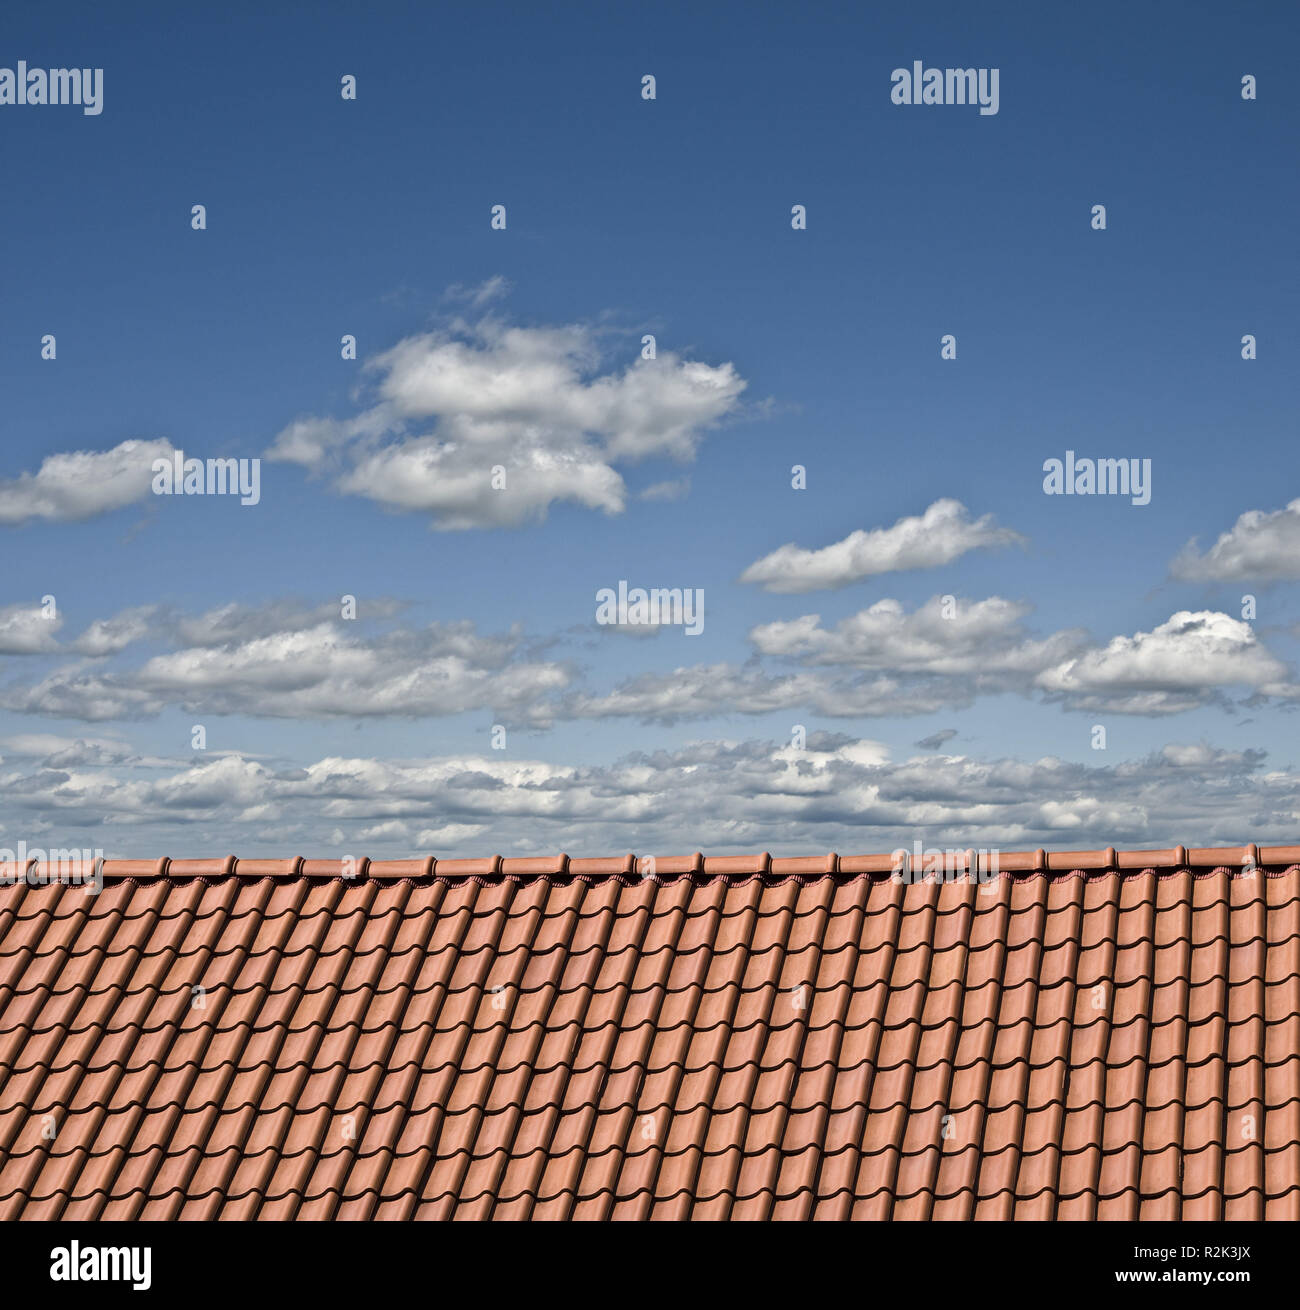 Conception, red roof, cloudied heaven, Stock Photo